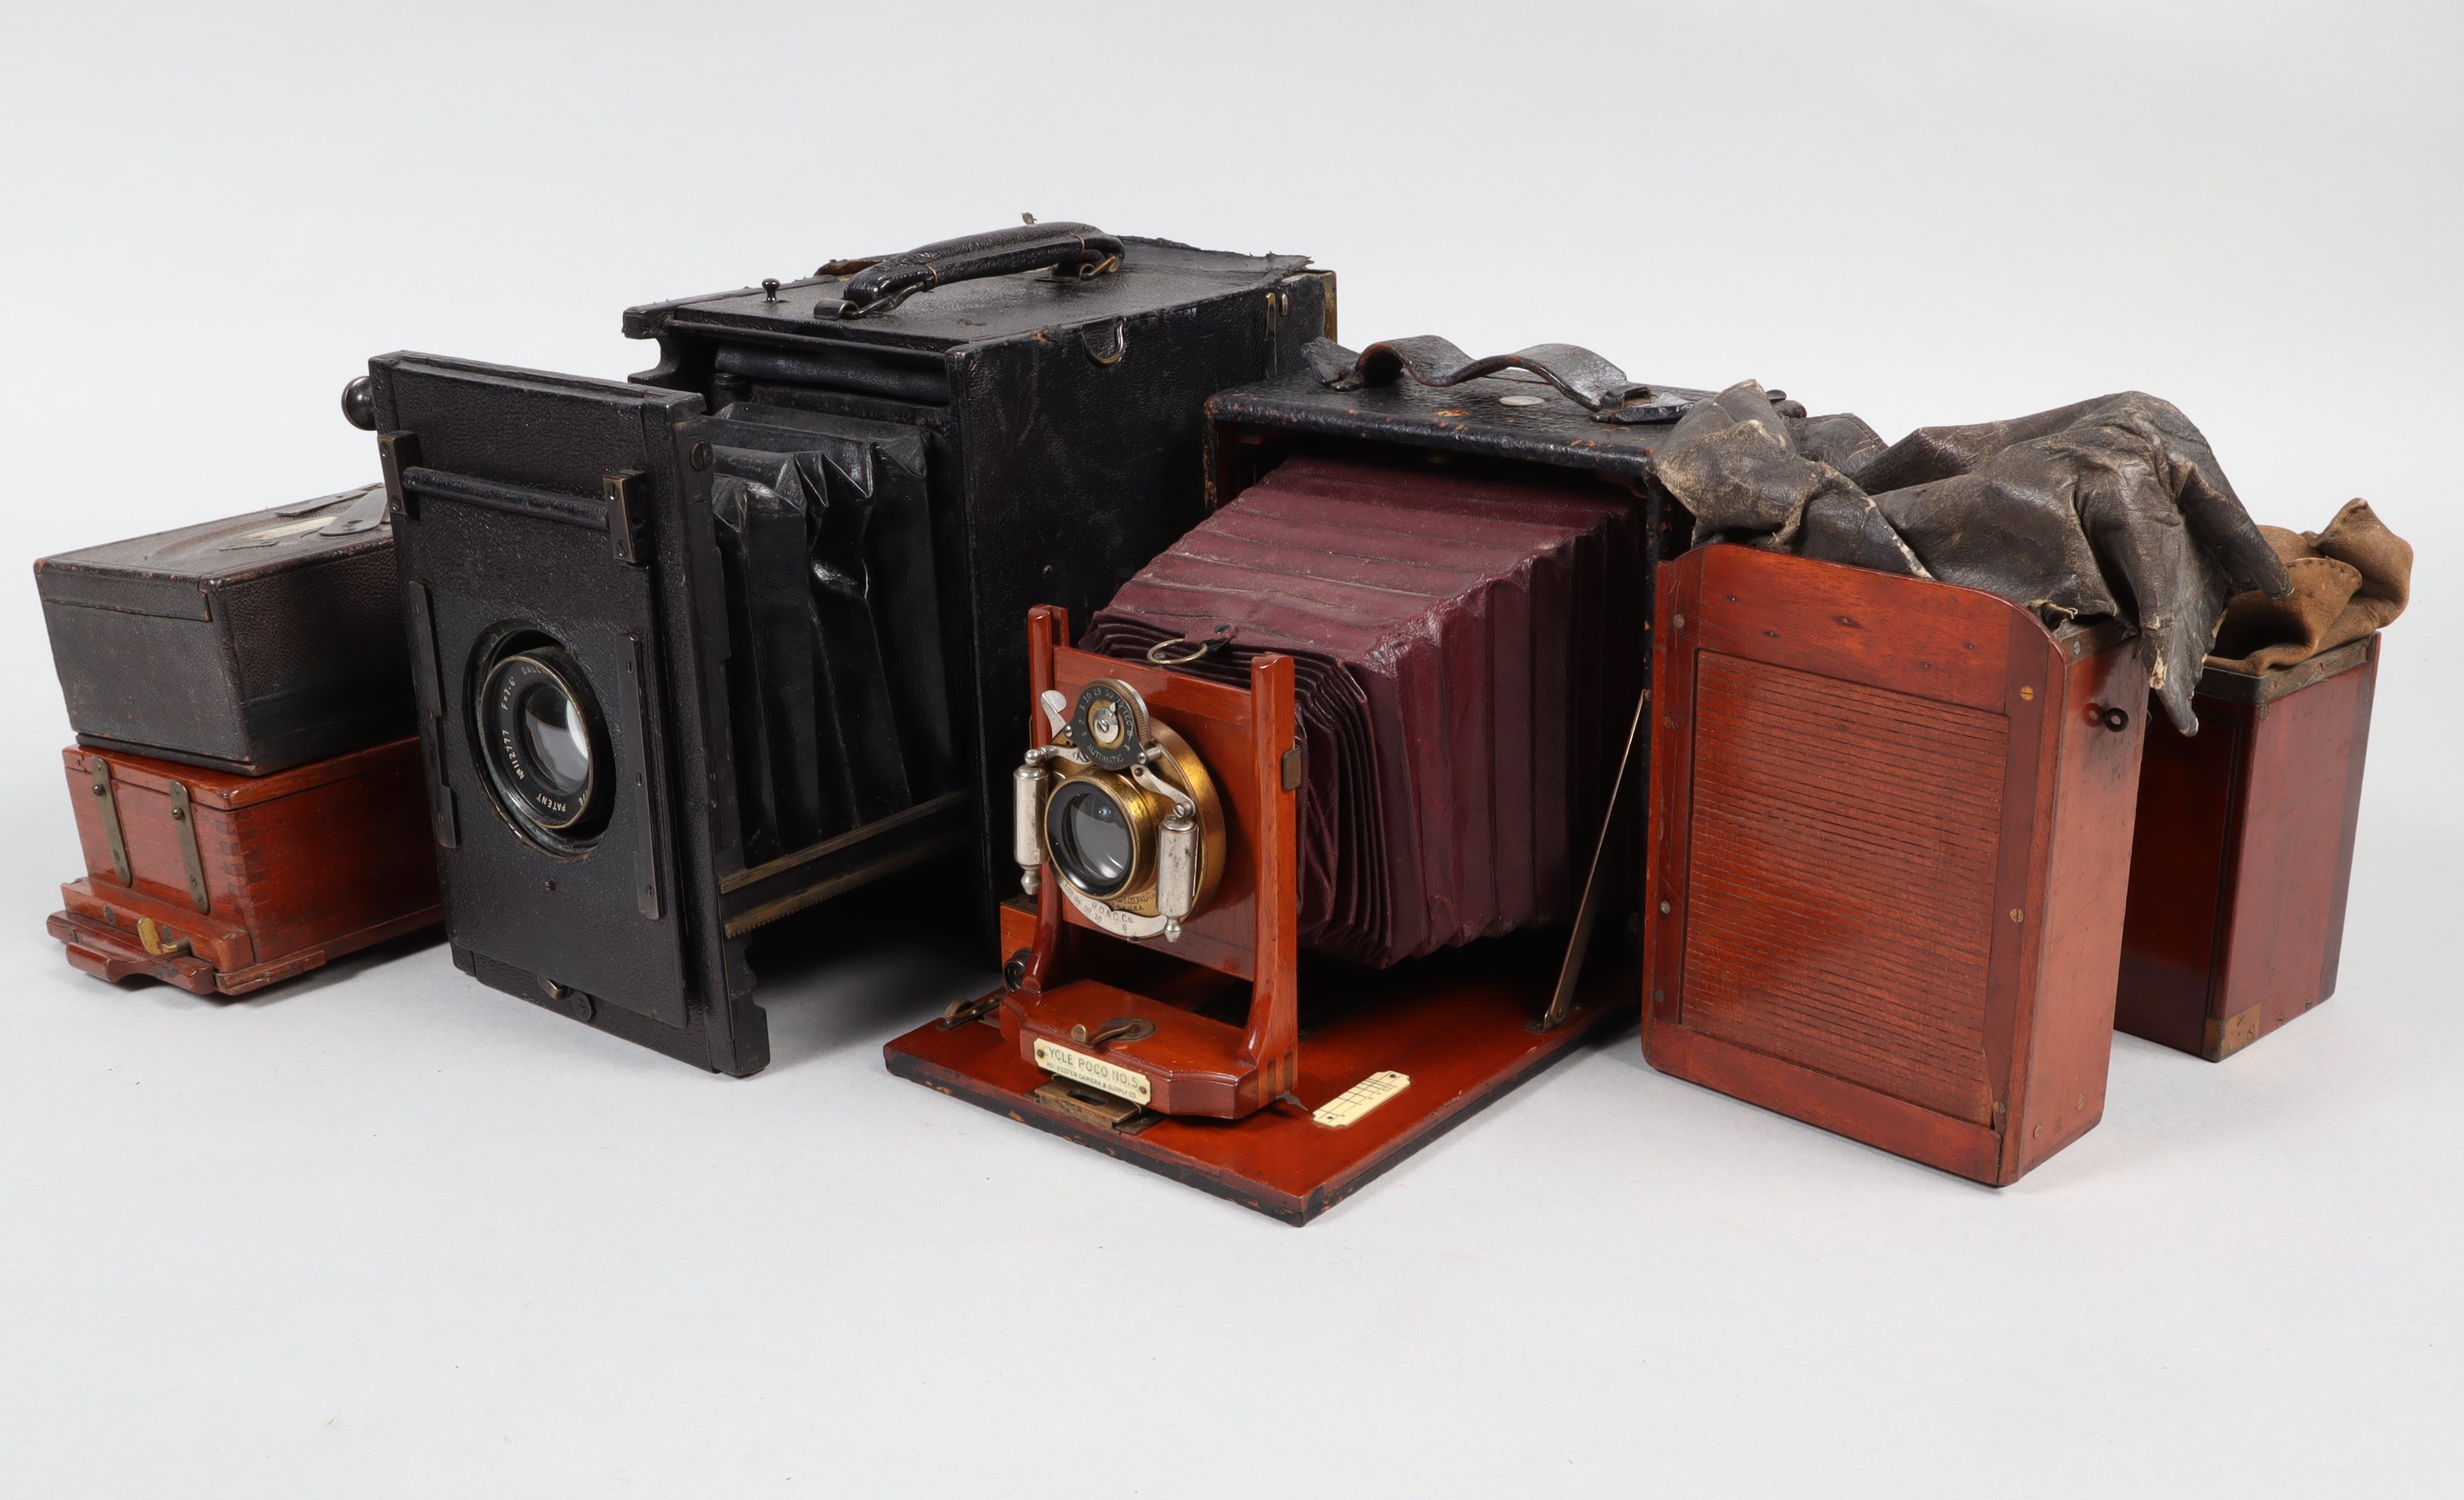 An Adams Minex and Other Cameras, an ICA Bebe strut-folding camera with film pack holder, an Adams